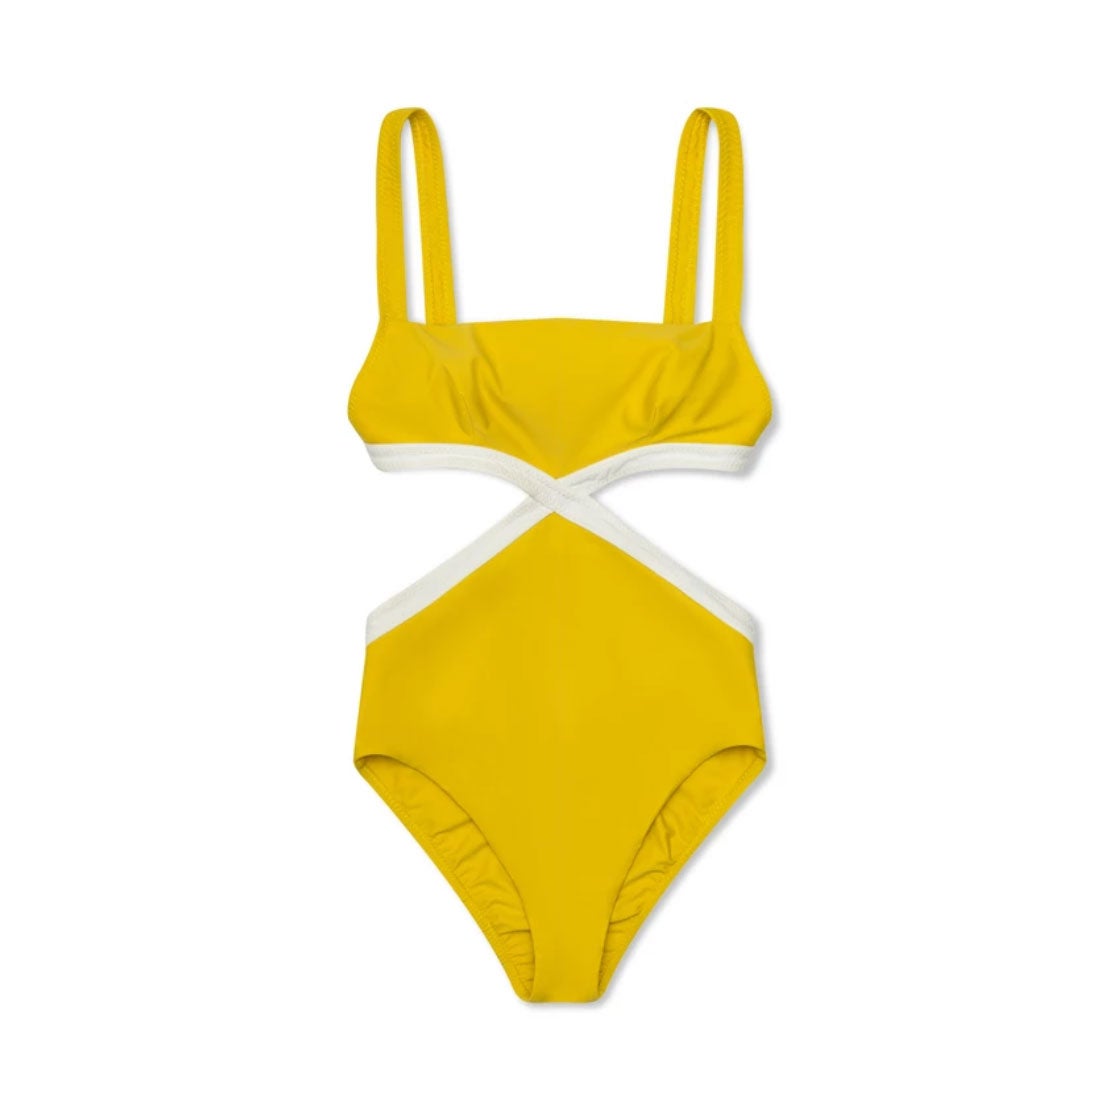 You Need These Bright Colored Swimsuits This Summer